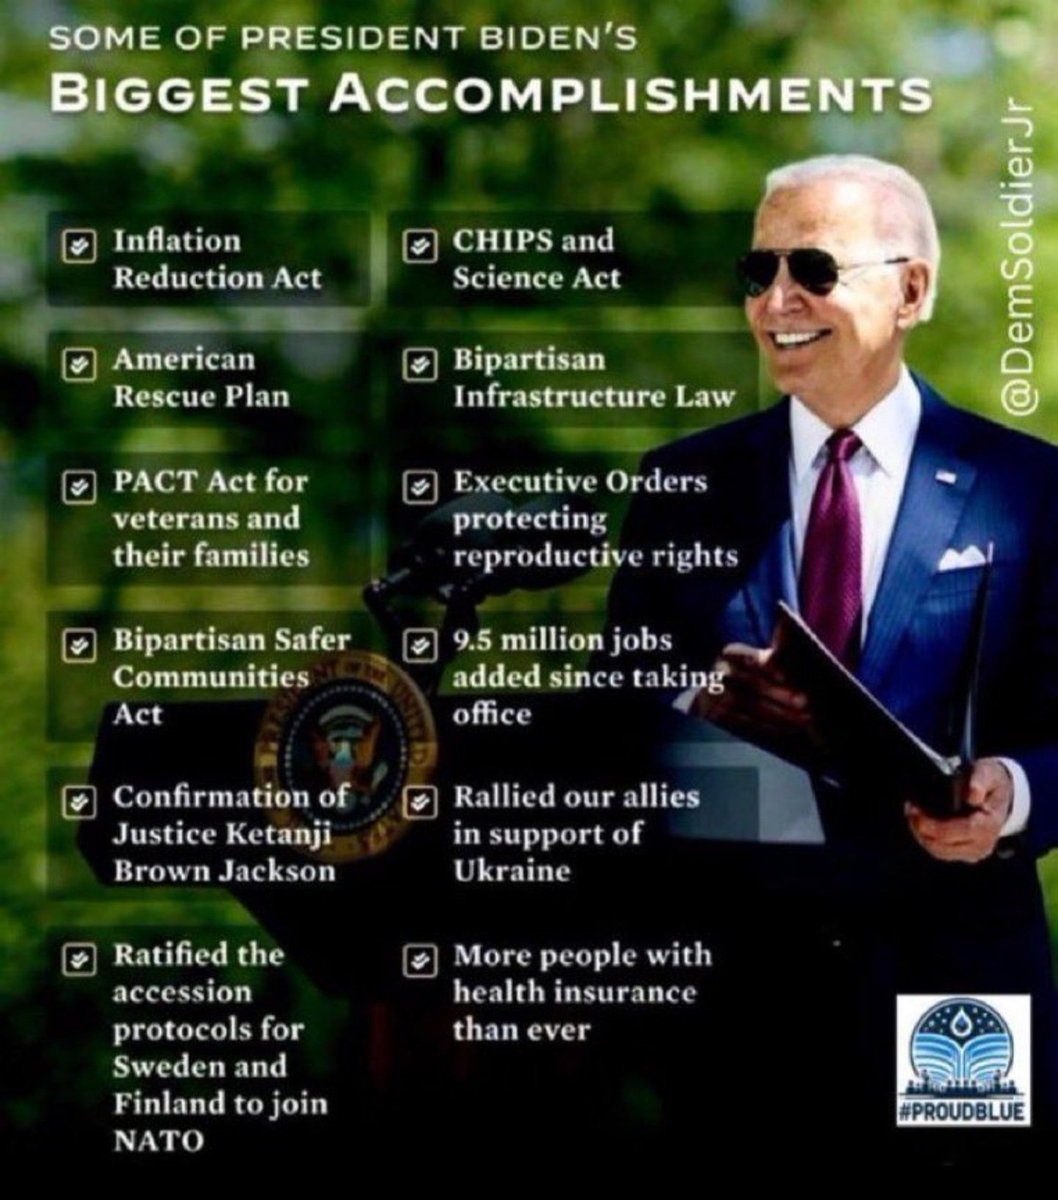 Ole Uncle Joe is getting stuff done. No drama. No chaos. No P**** grabbing. Just boring legislation to improve the lives of everyday Americans. #biden2024